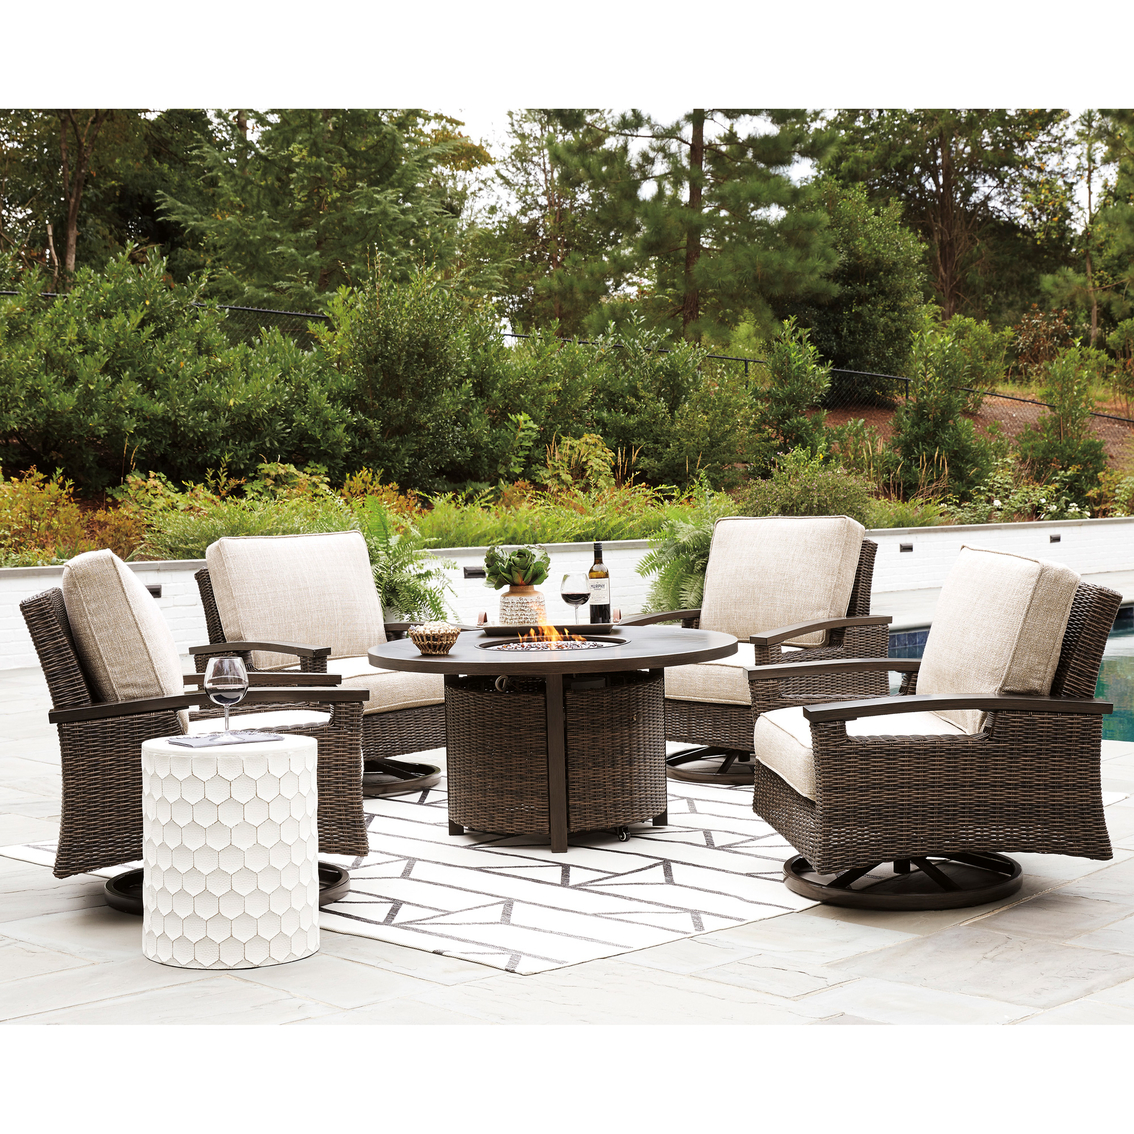 Signature Design by Ashley Paradise Trail Fire Pit Table with 4 Swivel Chairs - Image 2 of 6